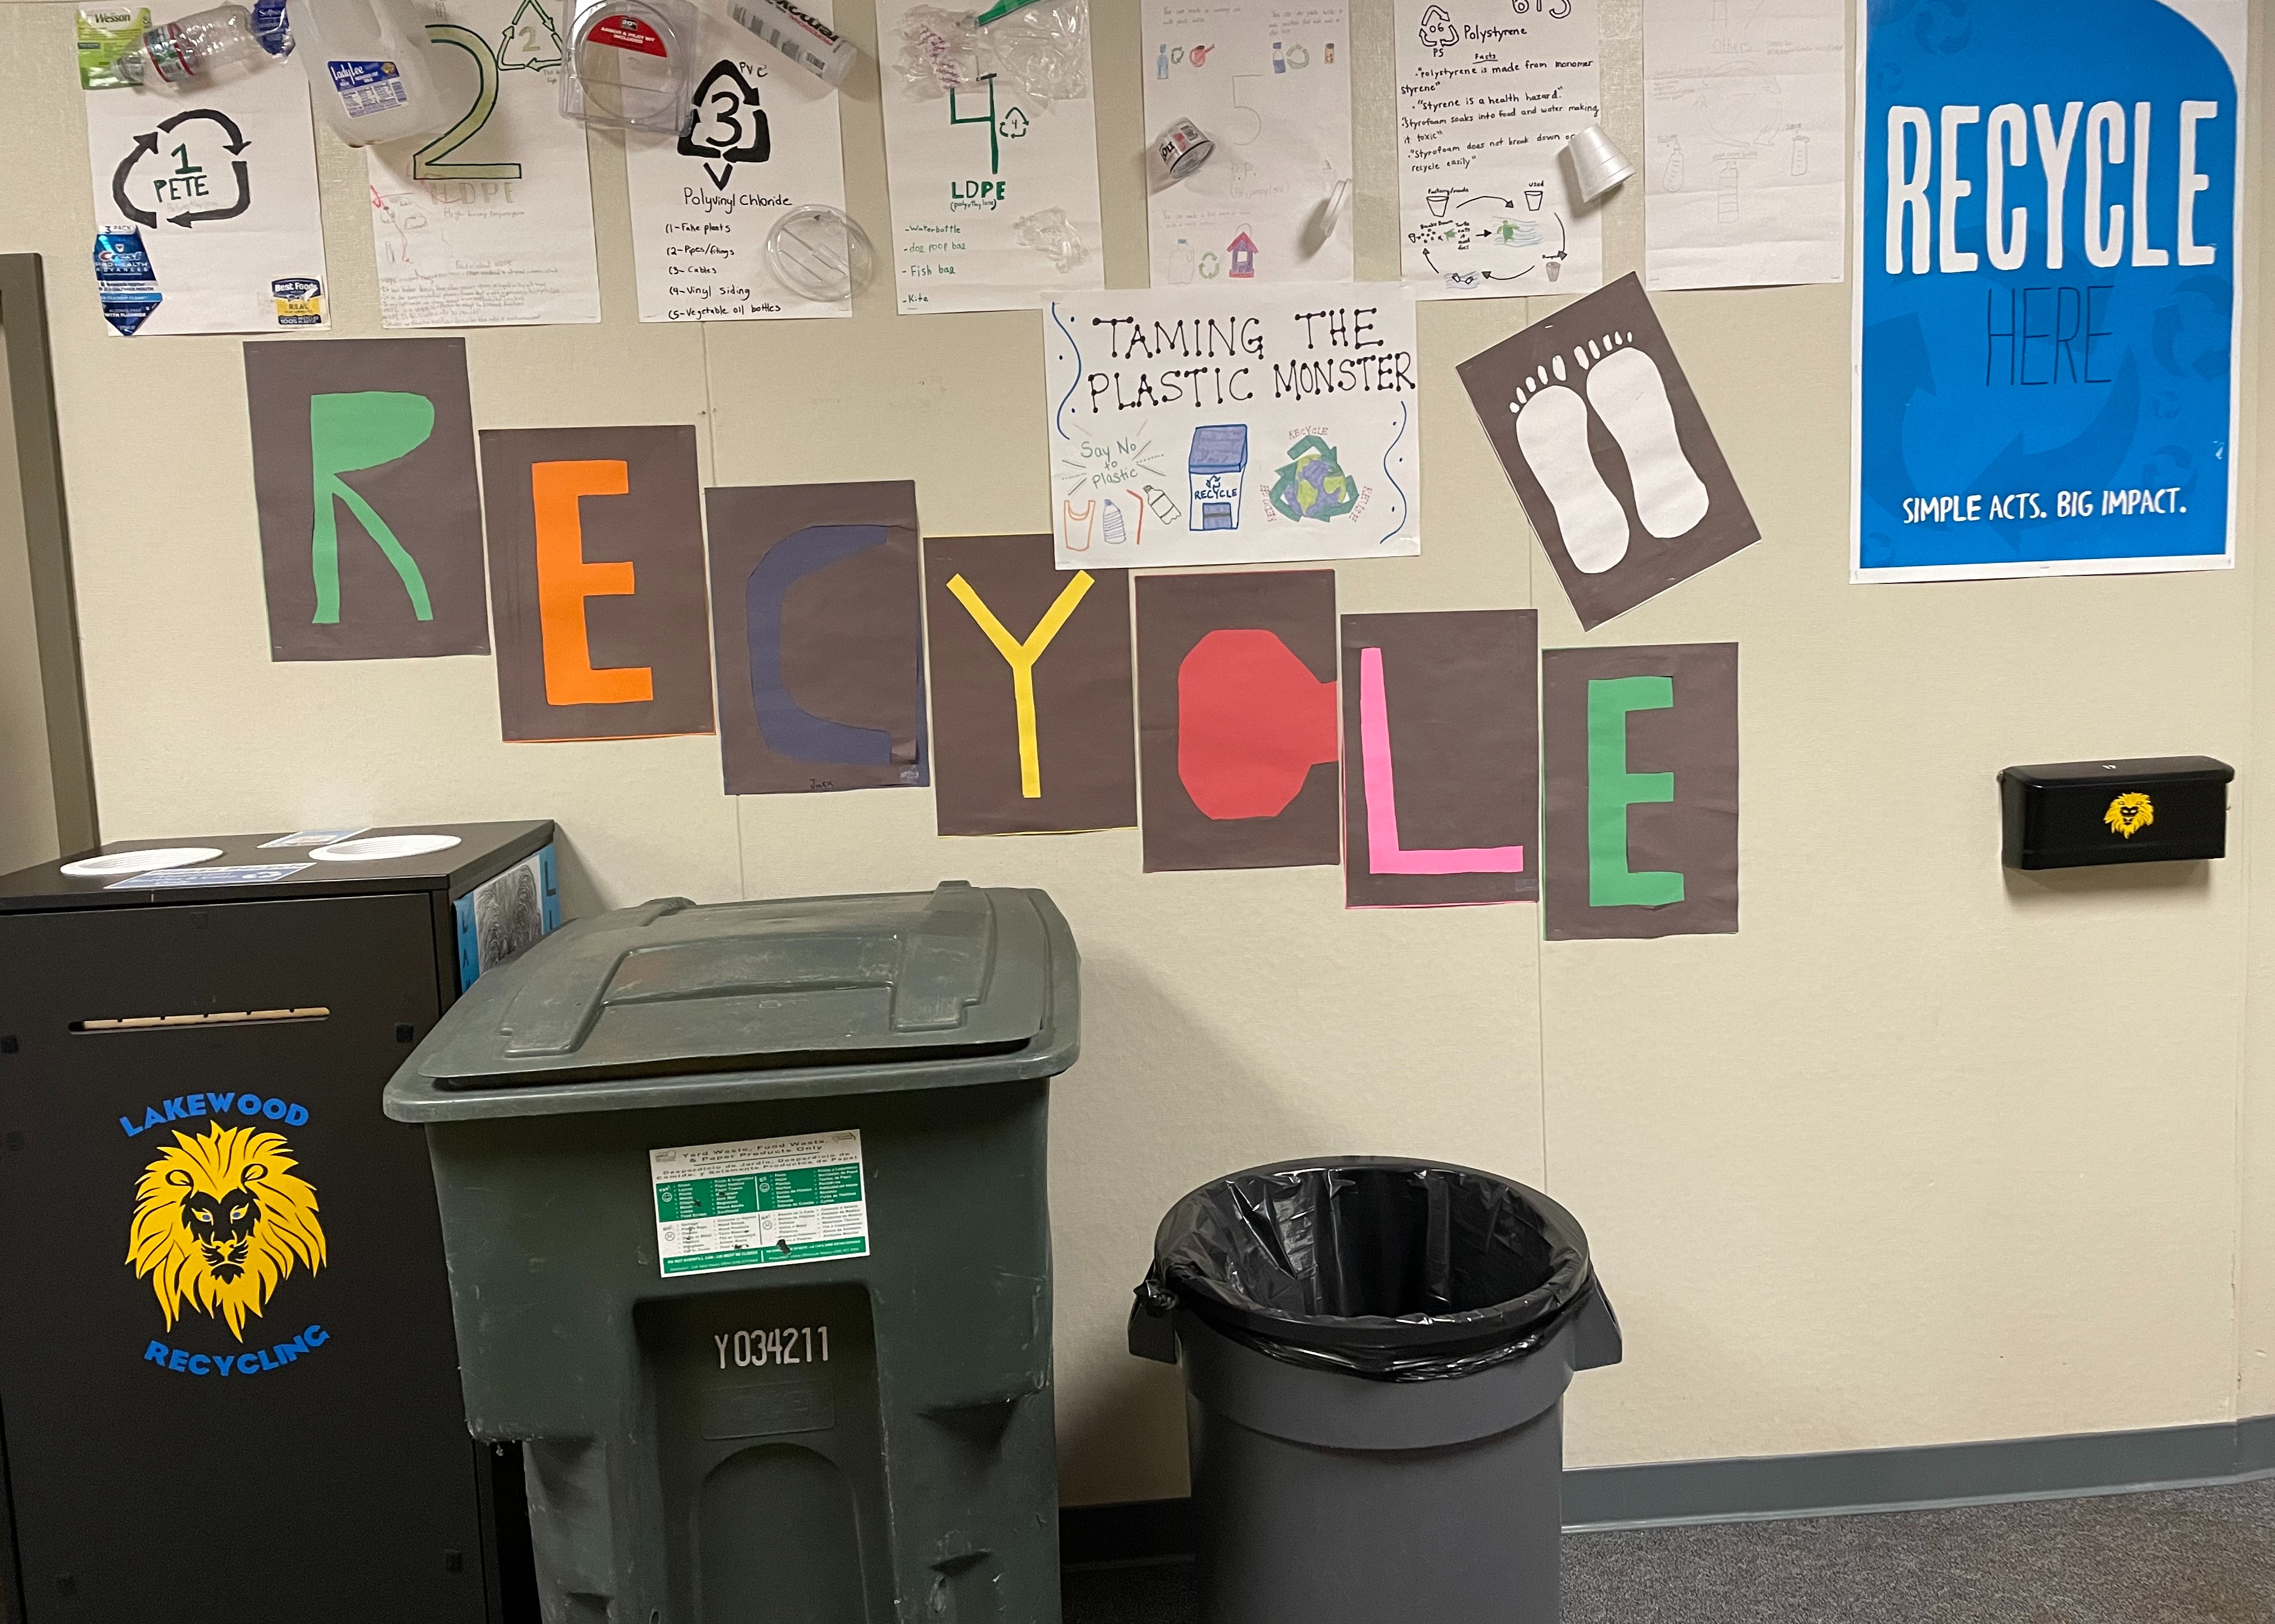 Lakewood's 3 bin Recycling Program. Check out the hallways transfer station!